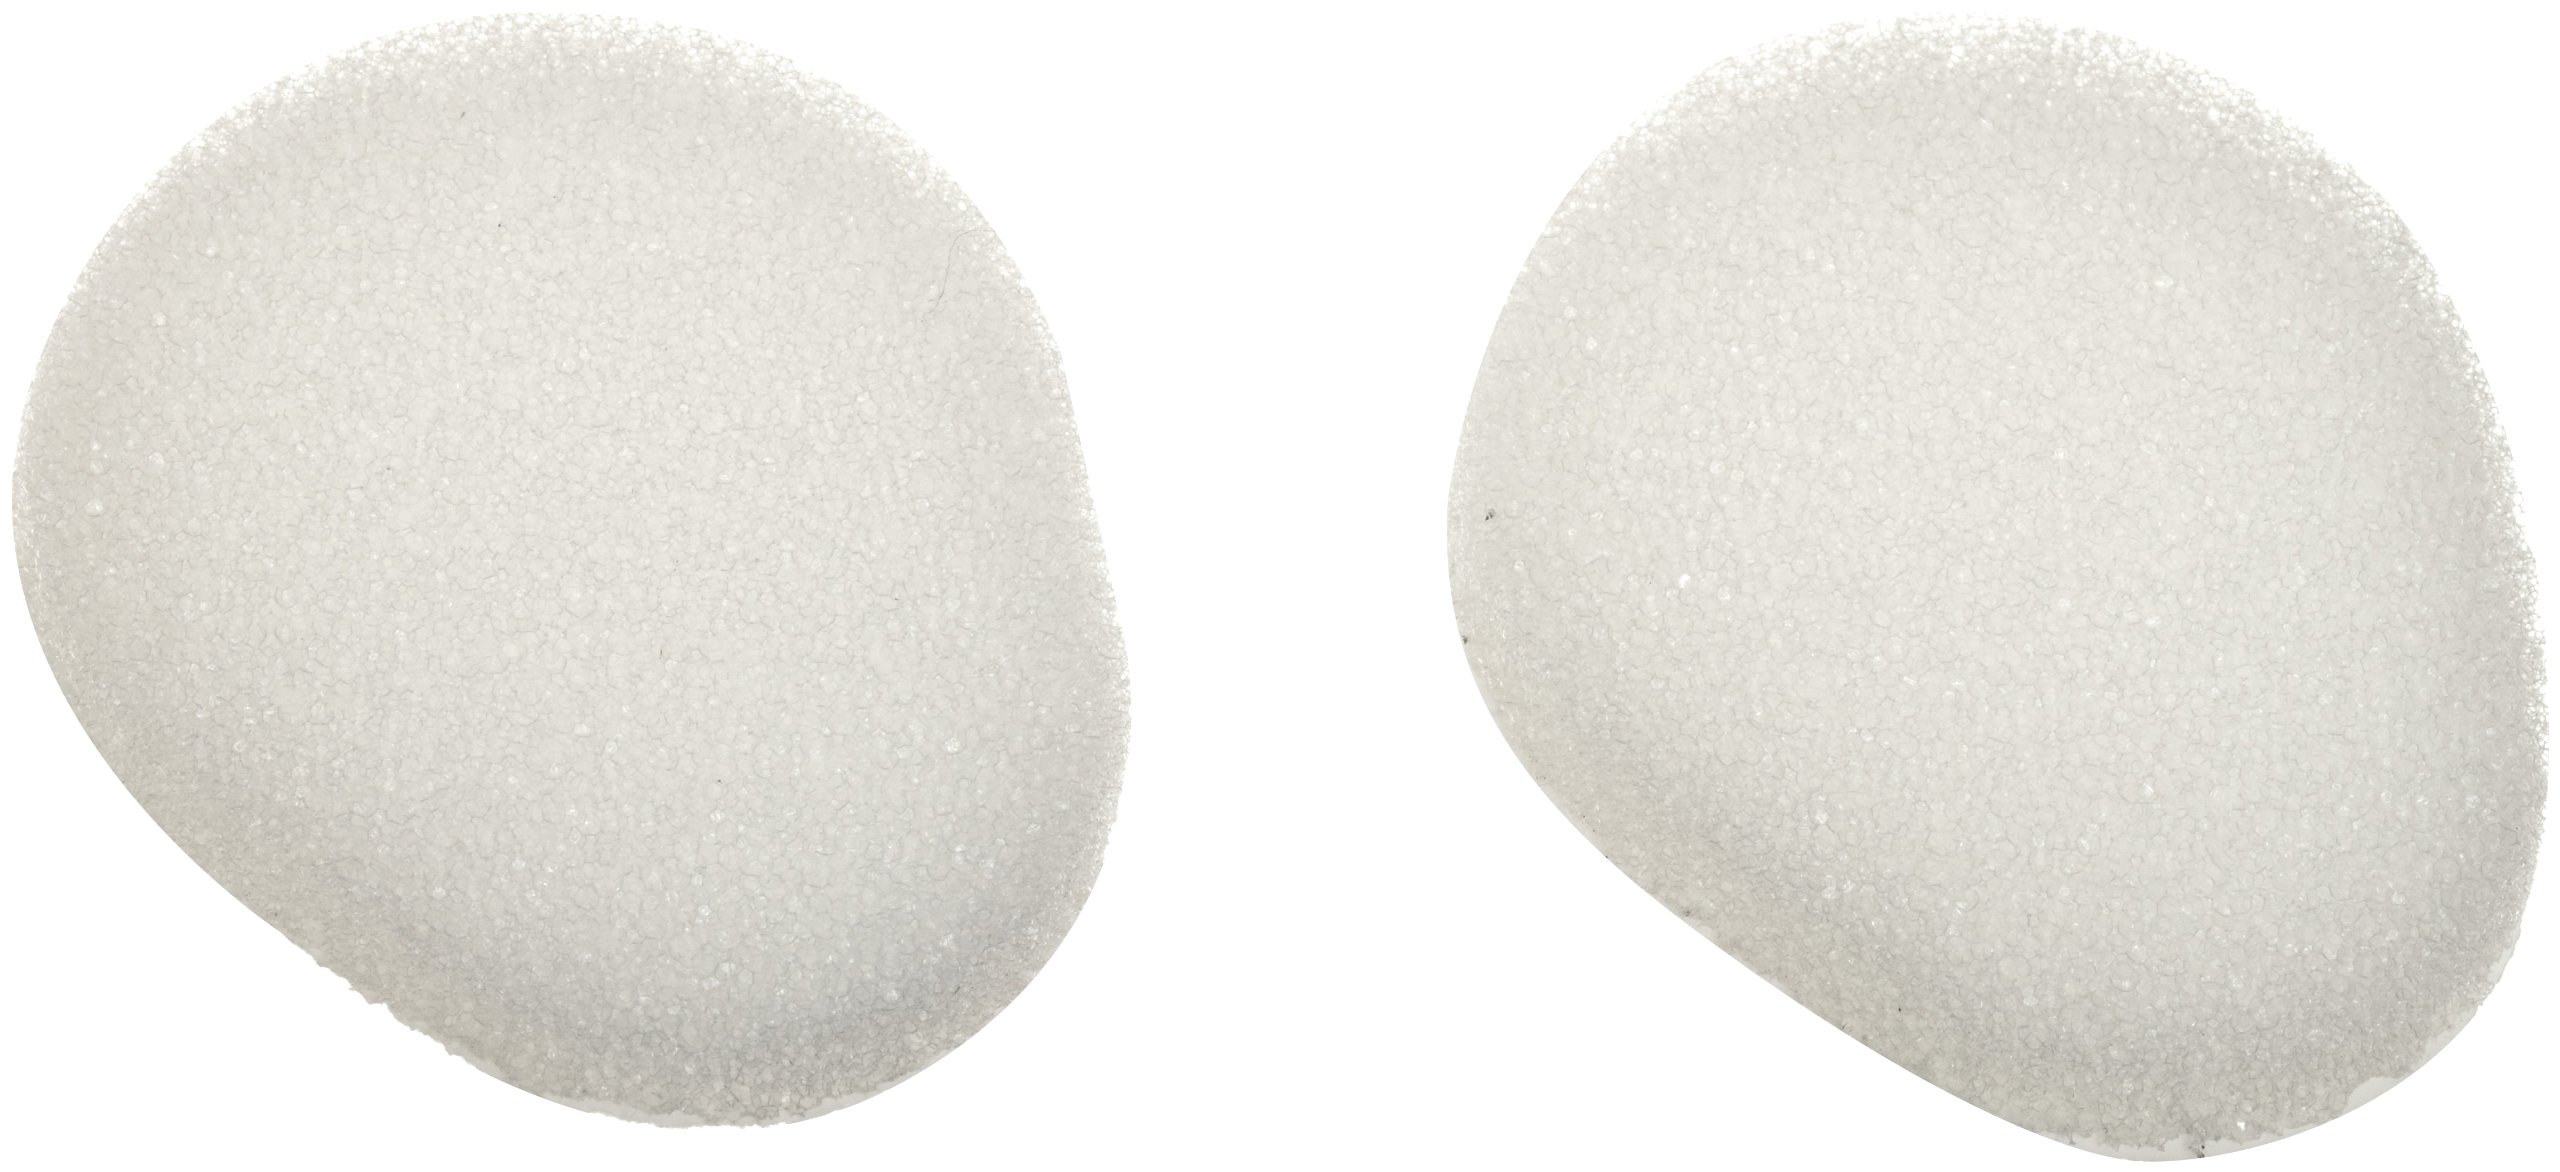 SP Ableware Lotion Applicator Replacement Sponges Only - Pack of 2 (741330001)